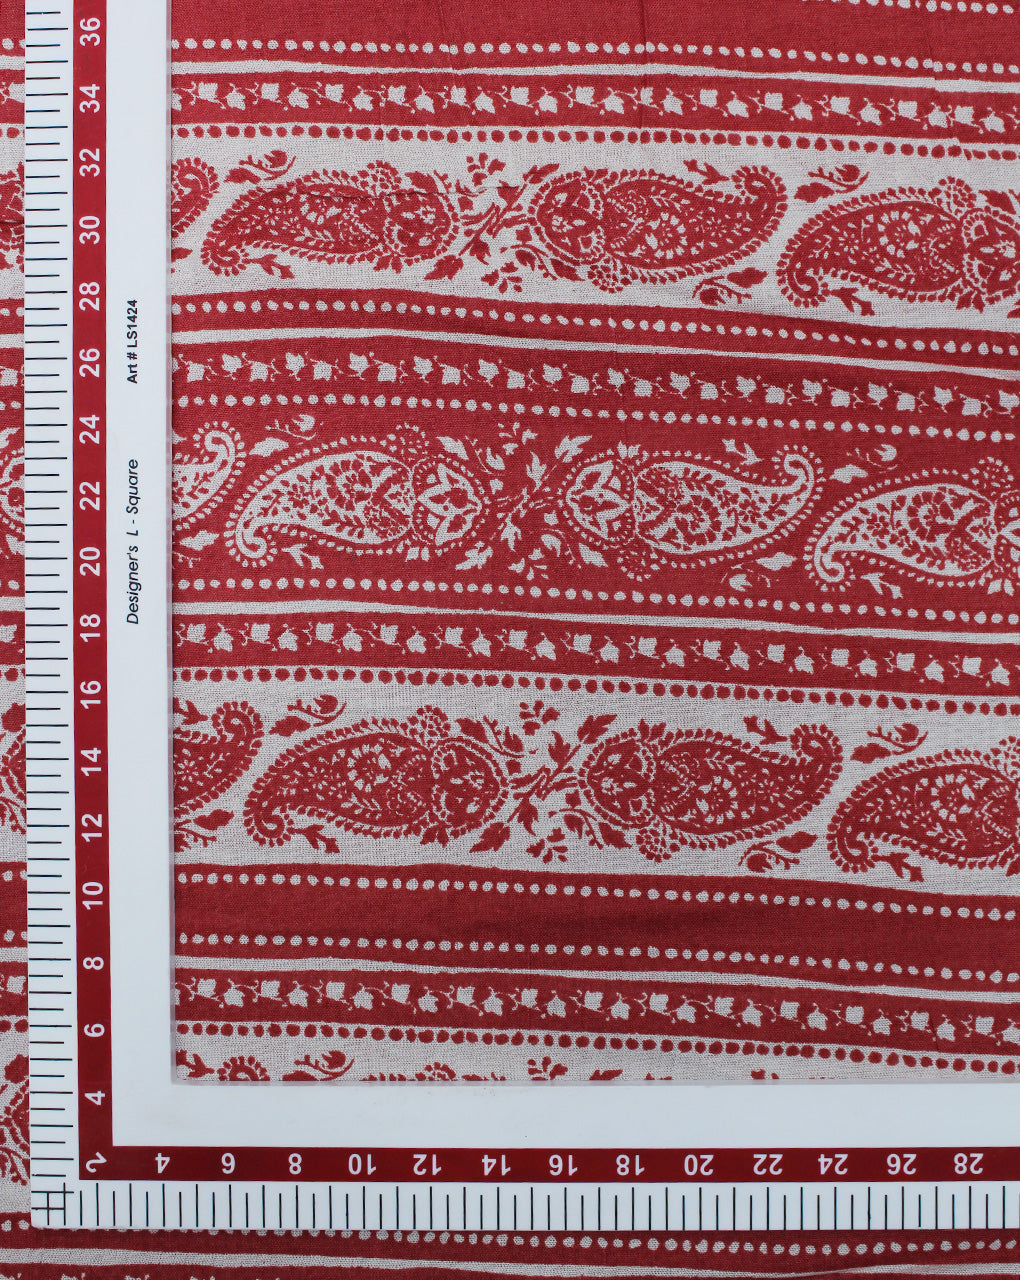 RED & WHITE PAISLEY DESIGN RAYON CREPE PRINTED FABRIC